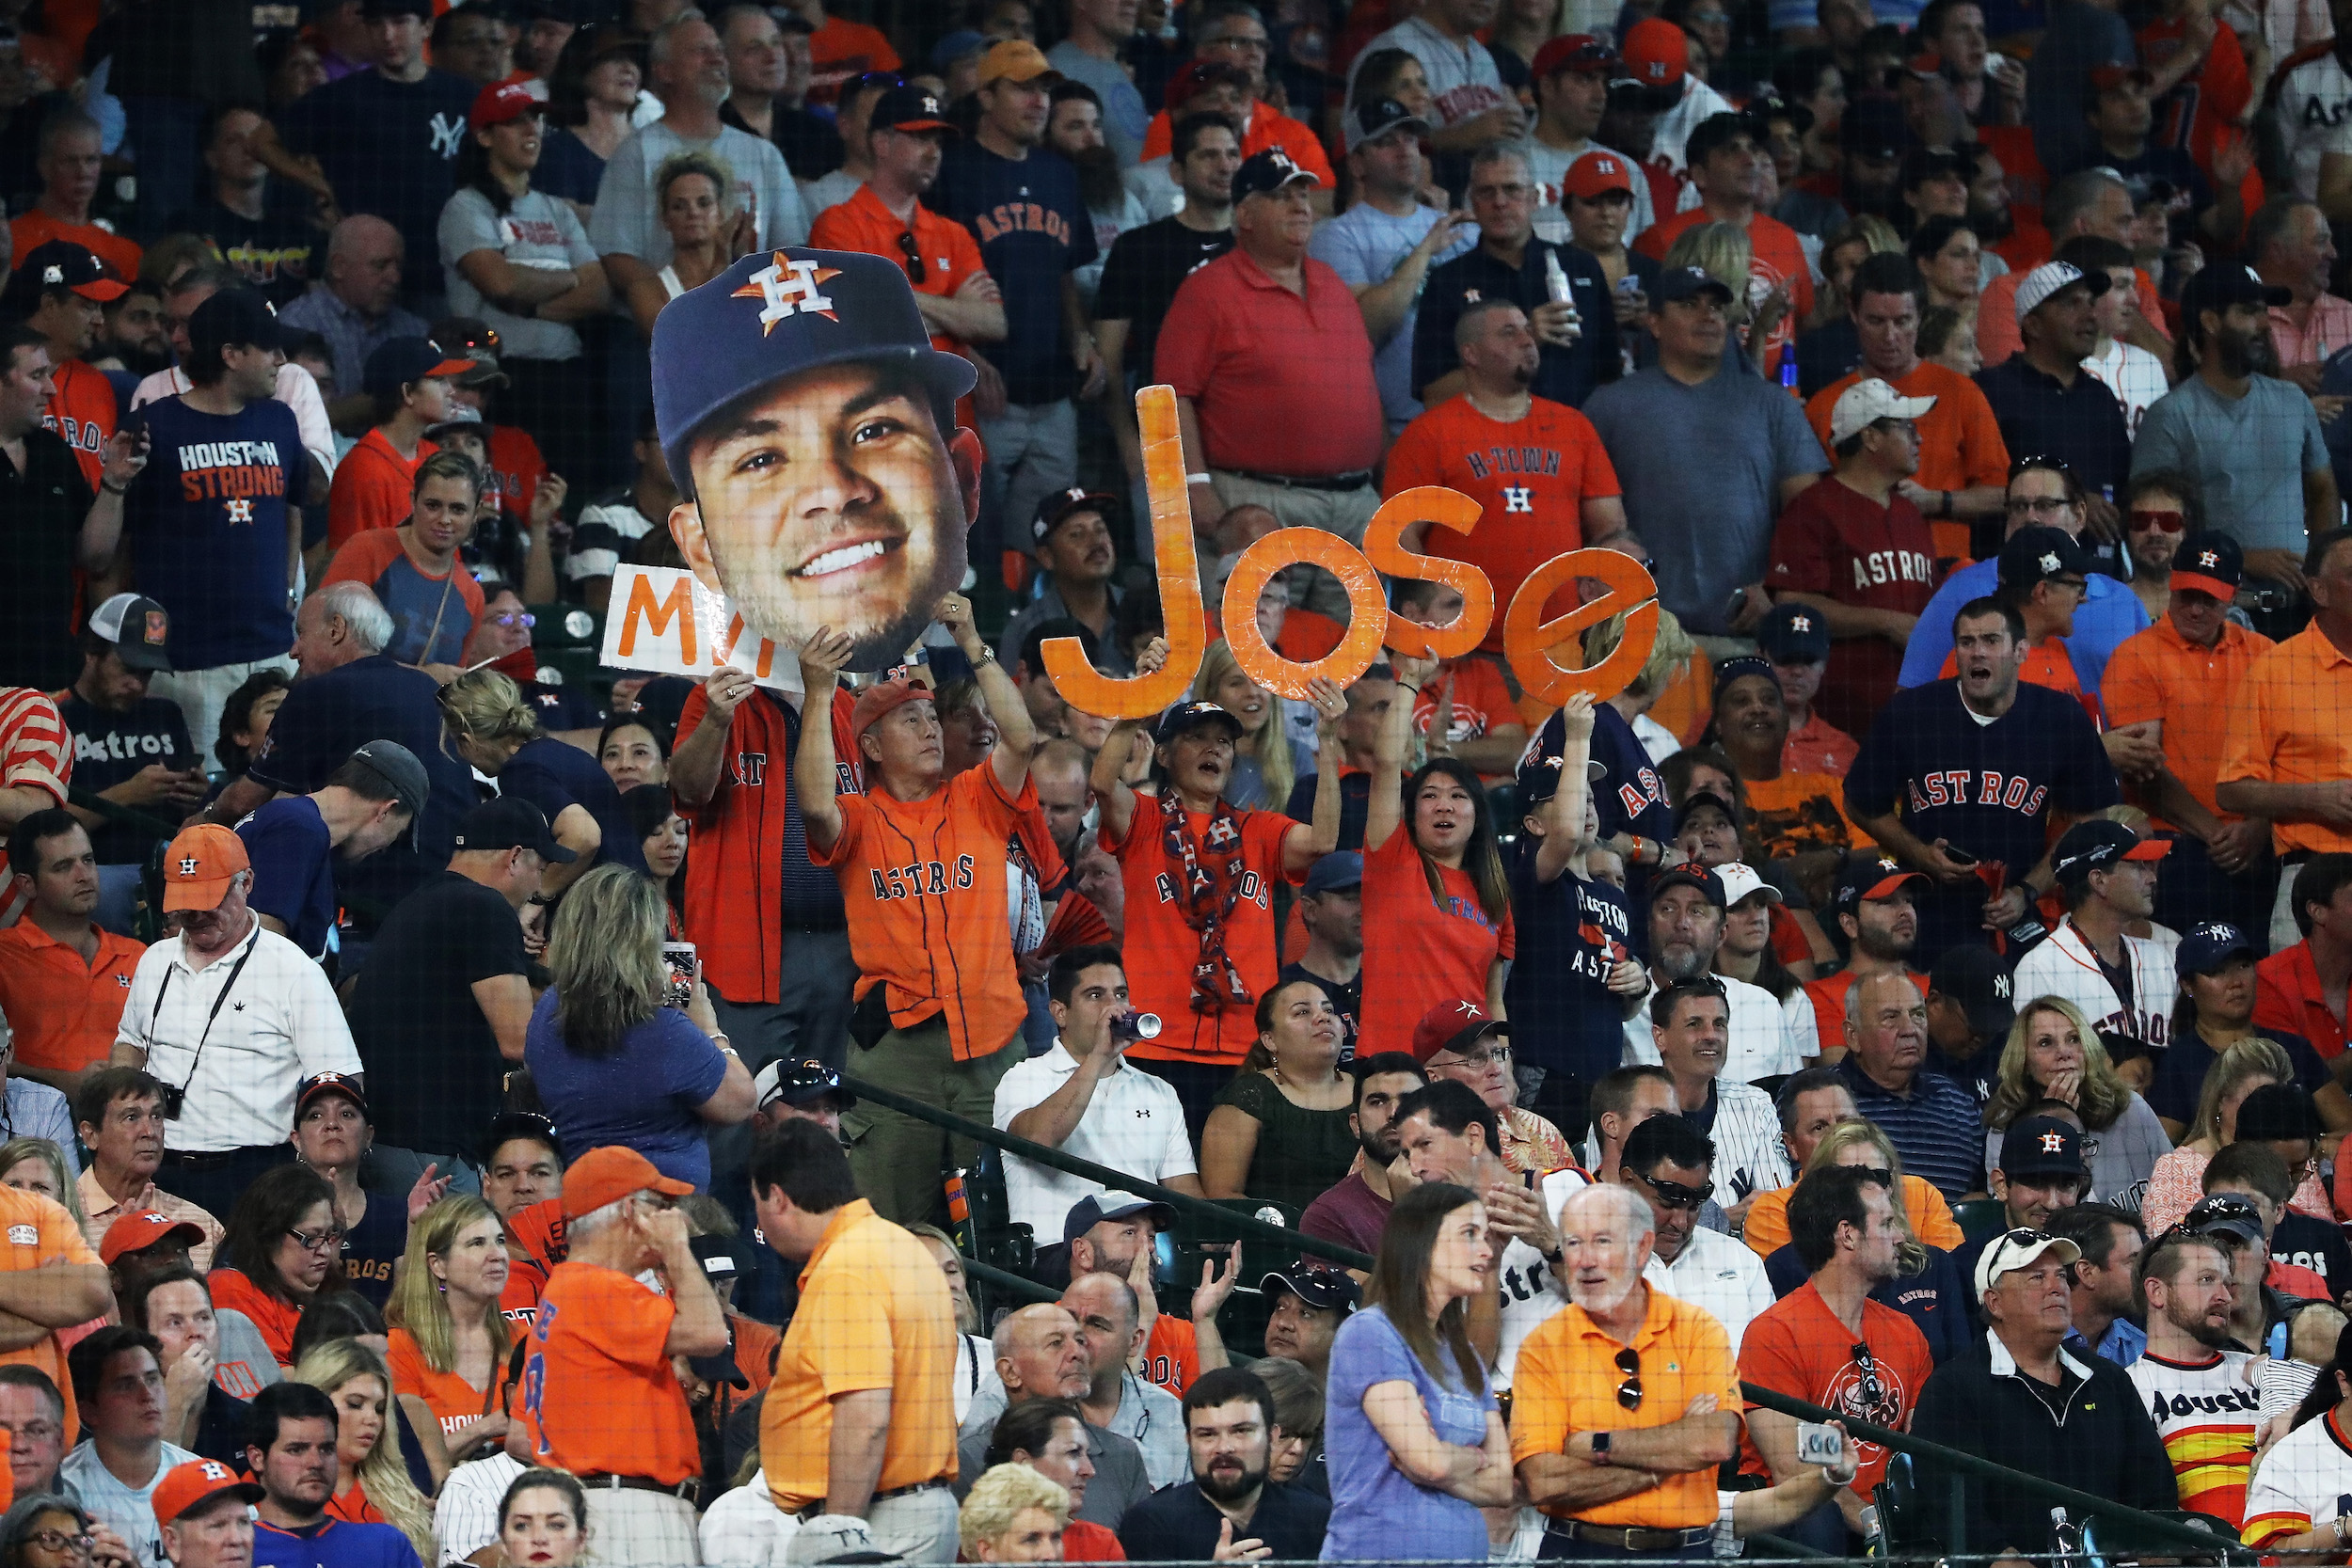 7 Things Youll Only Relate To If Youre A Diehard Houston Astros Fan